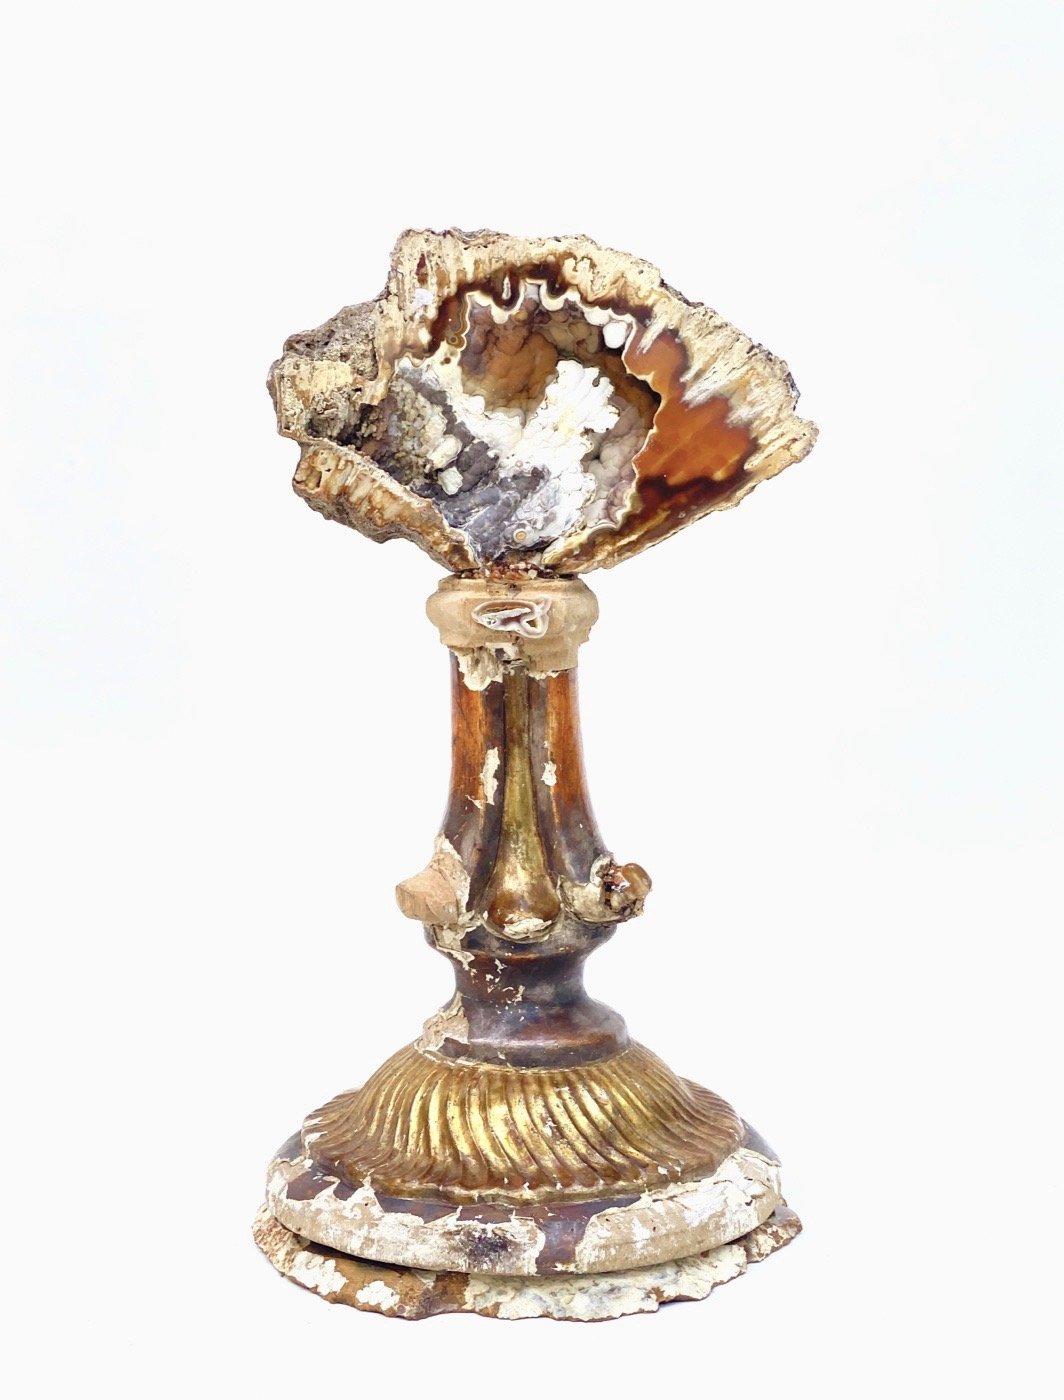 18th century Italian candlestick base with agatized coral on a polished agate base.

The 18th century hand carved, painted, and gold-leafed candlestick is originally from Tuscany. The polished agate coral coordinates exactly with the 18th century